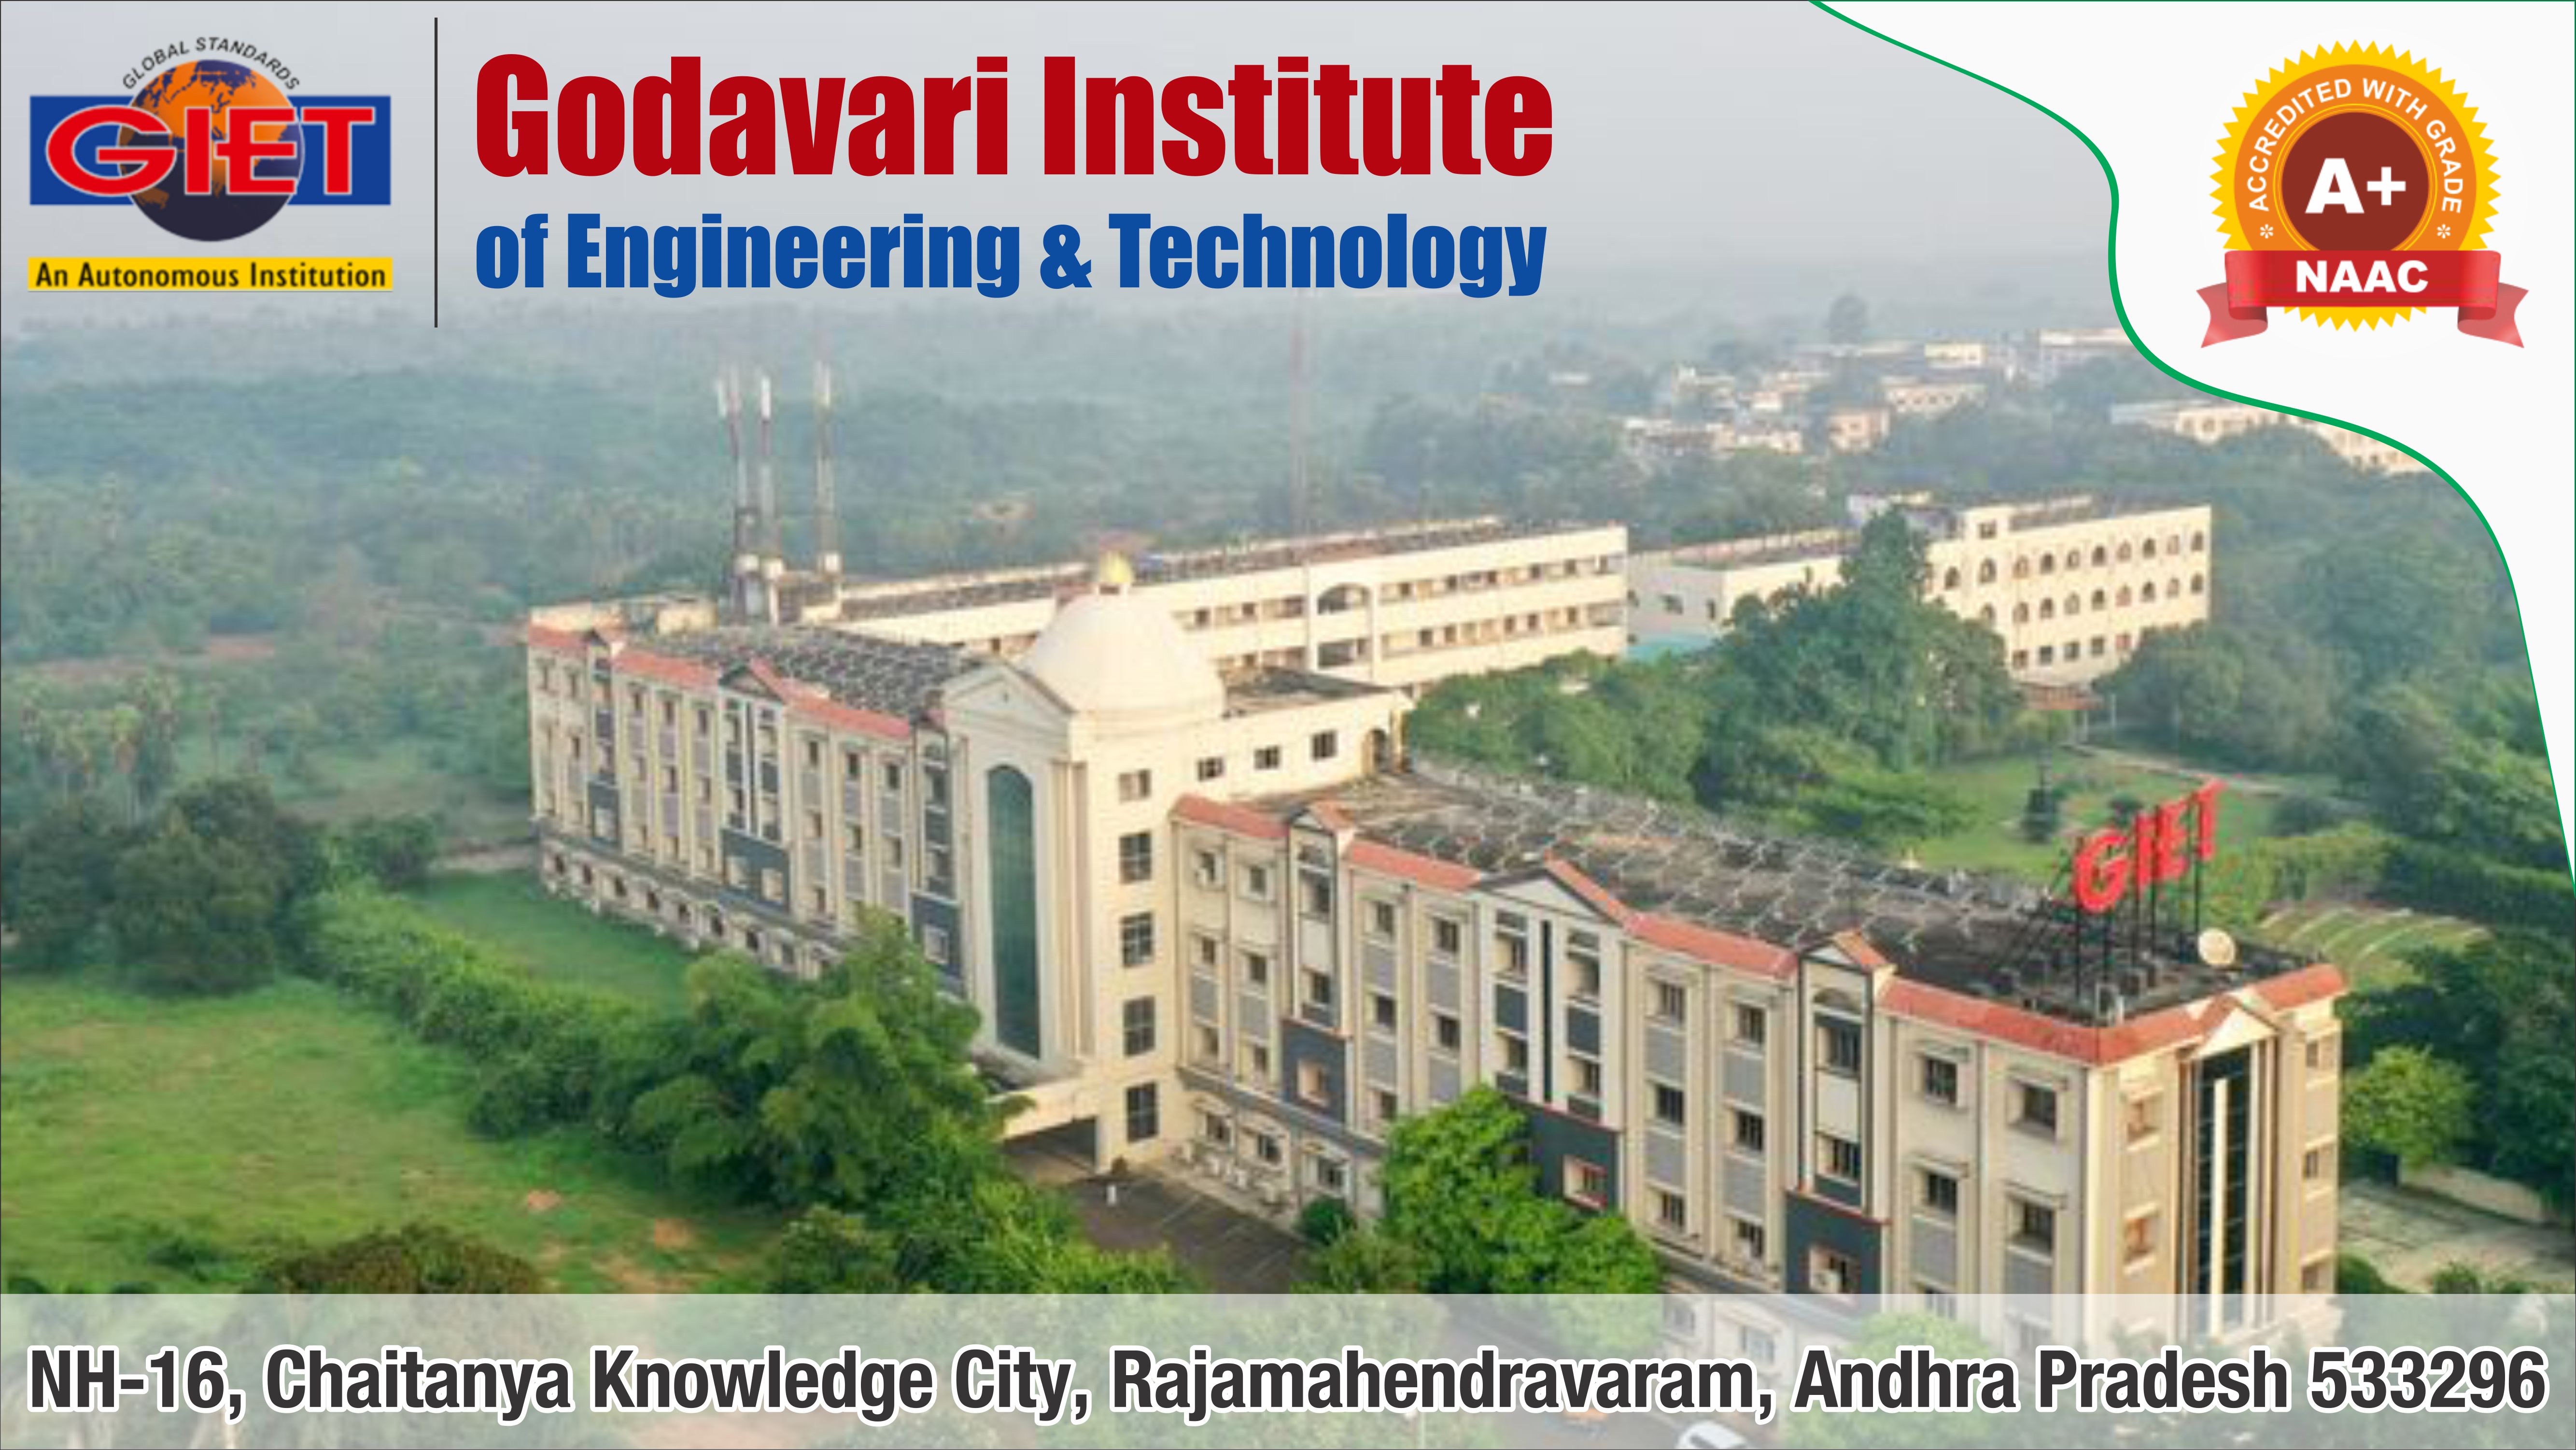 out side view of Godavari Institute of Engineering and Technology